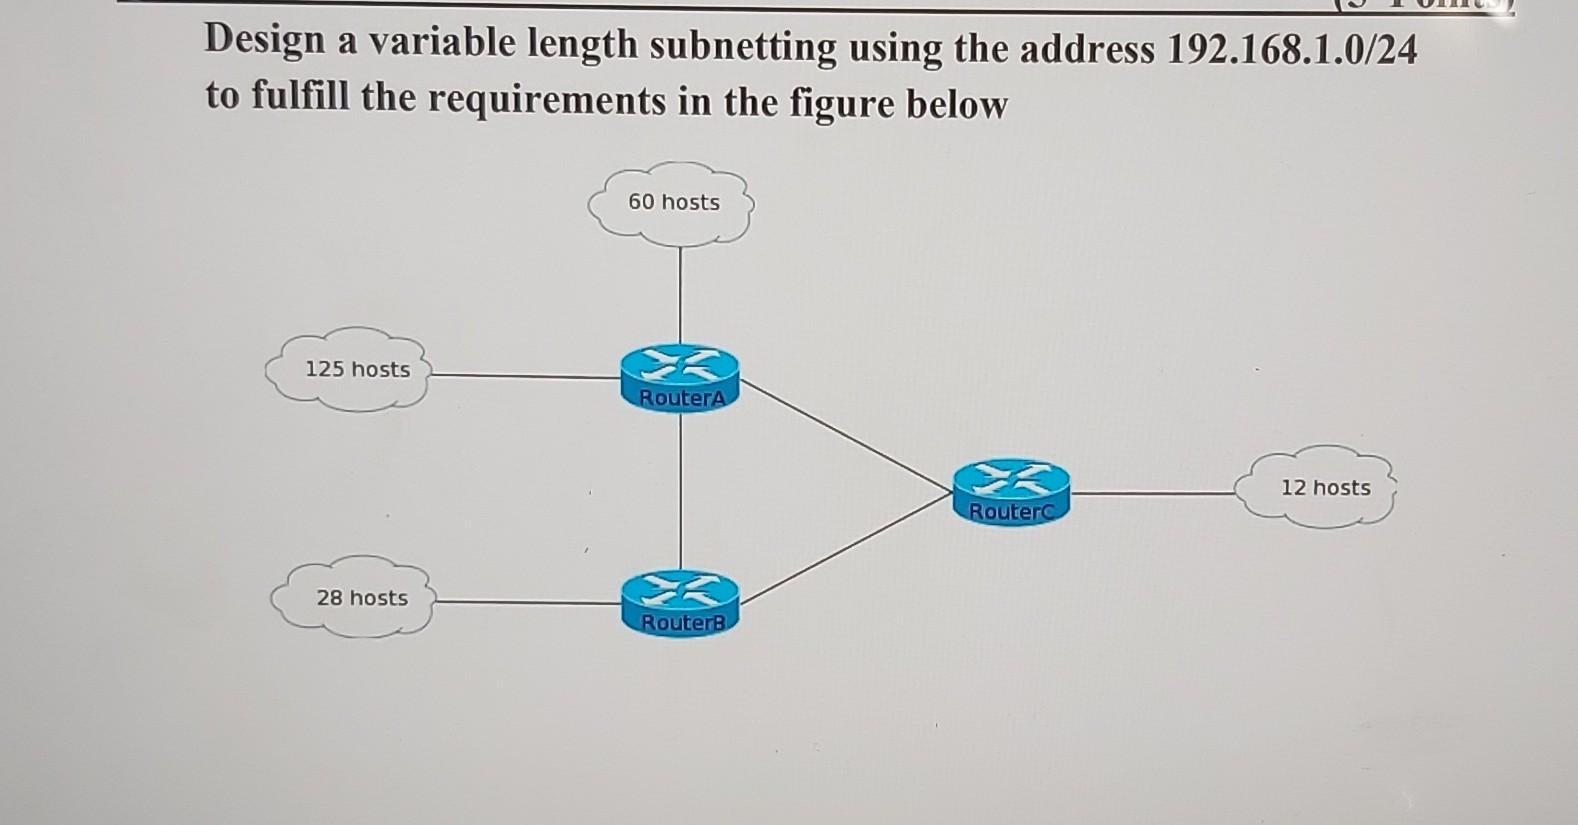 Design a variable length subnetting using the address 192.168.1.0/24 to fulfill the requirements in the